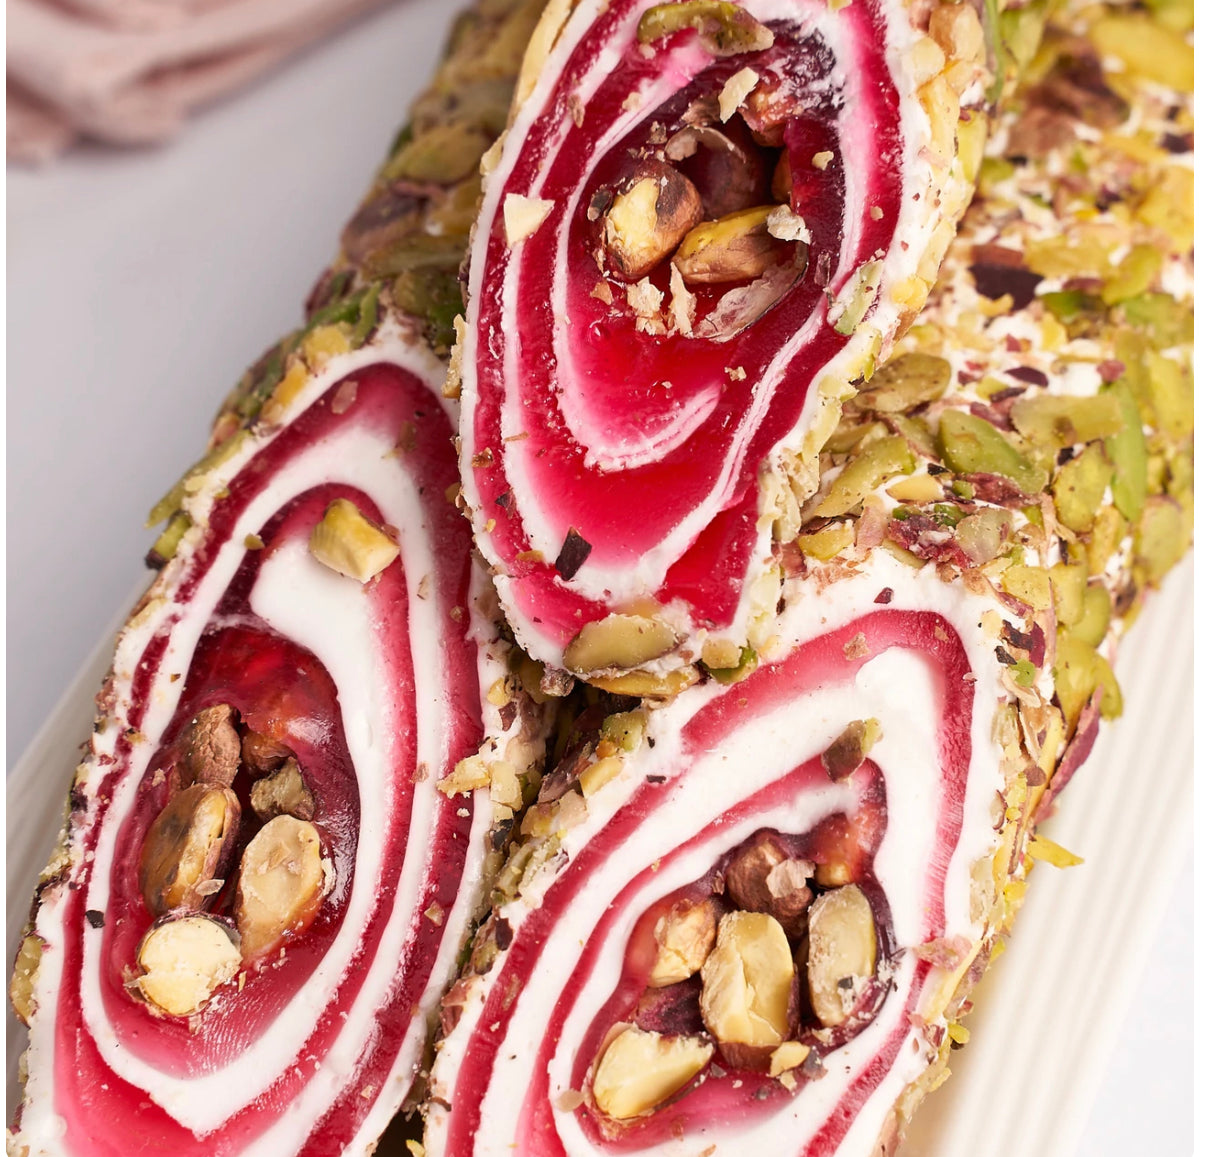 Rose Sultan's Delight with Pistachios